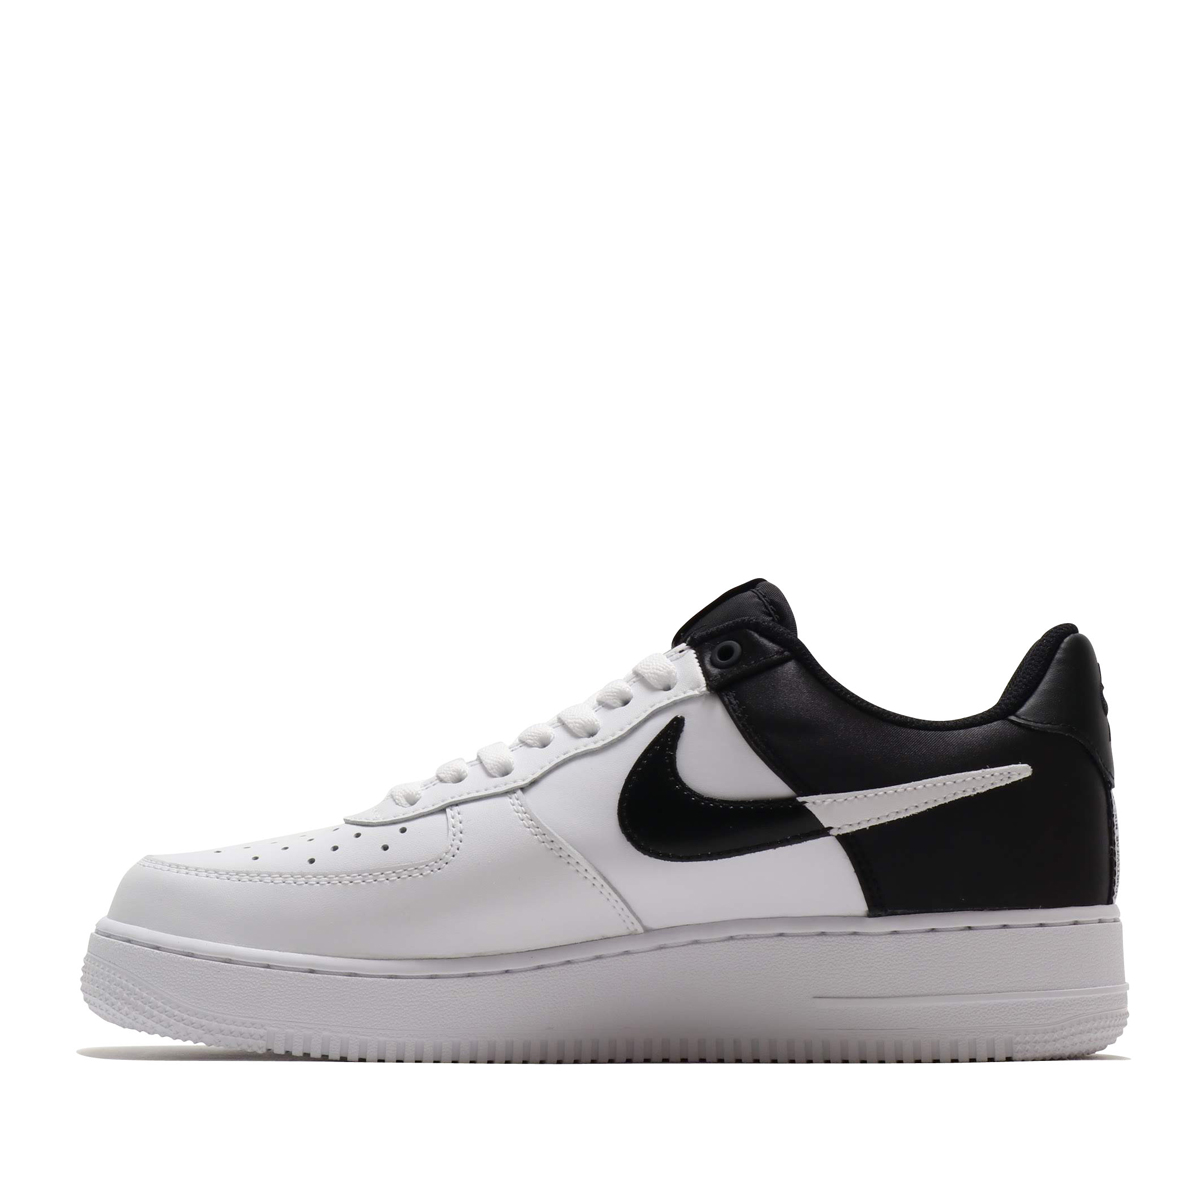 white and black air force 1 lv8